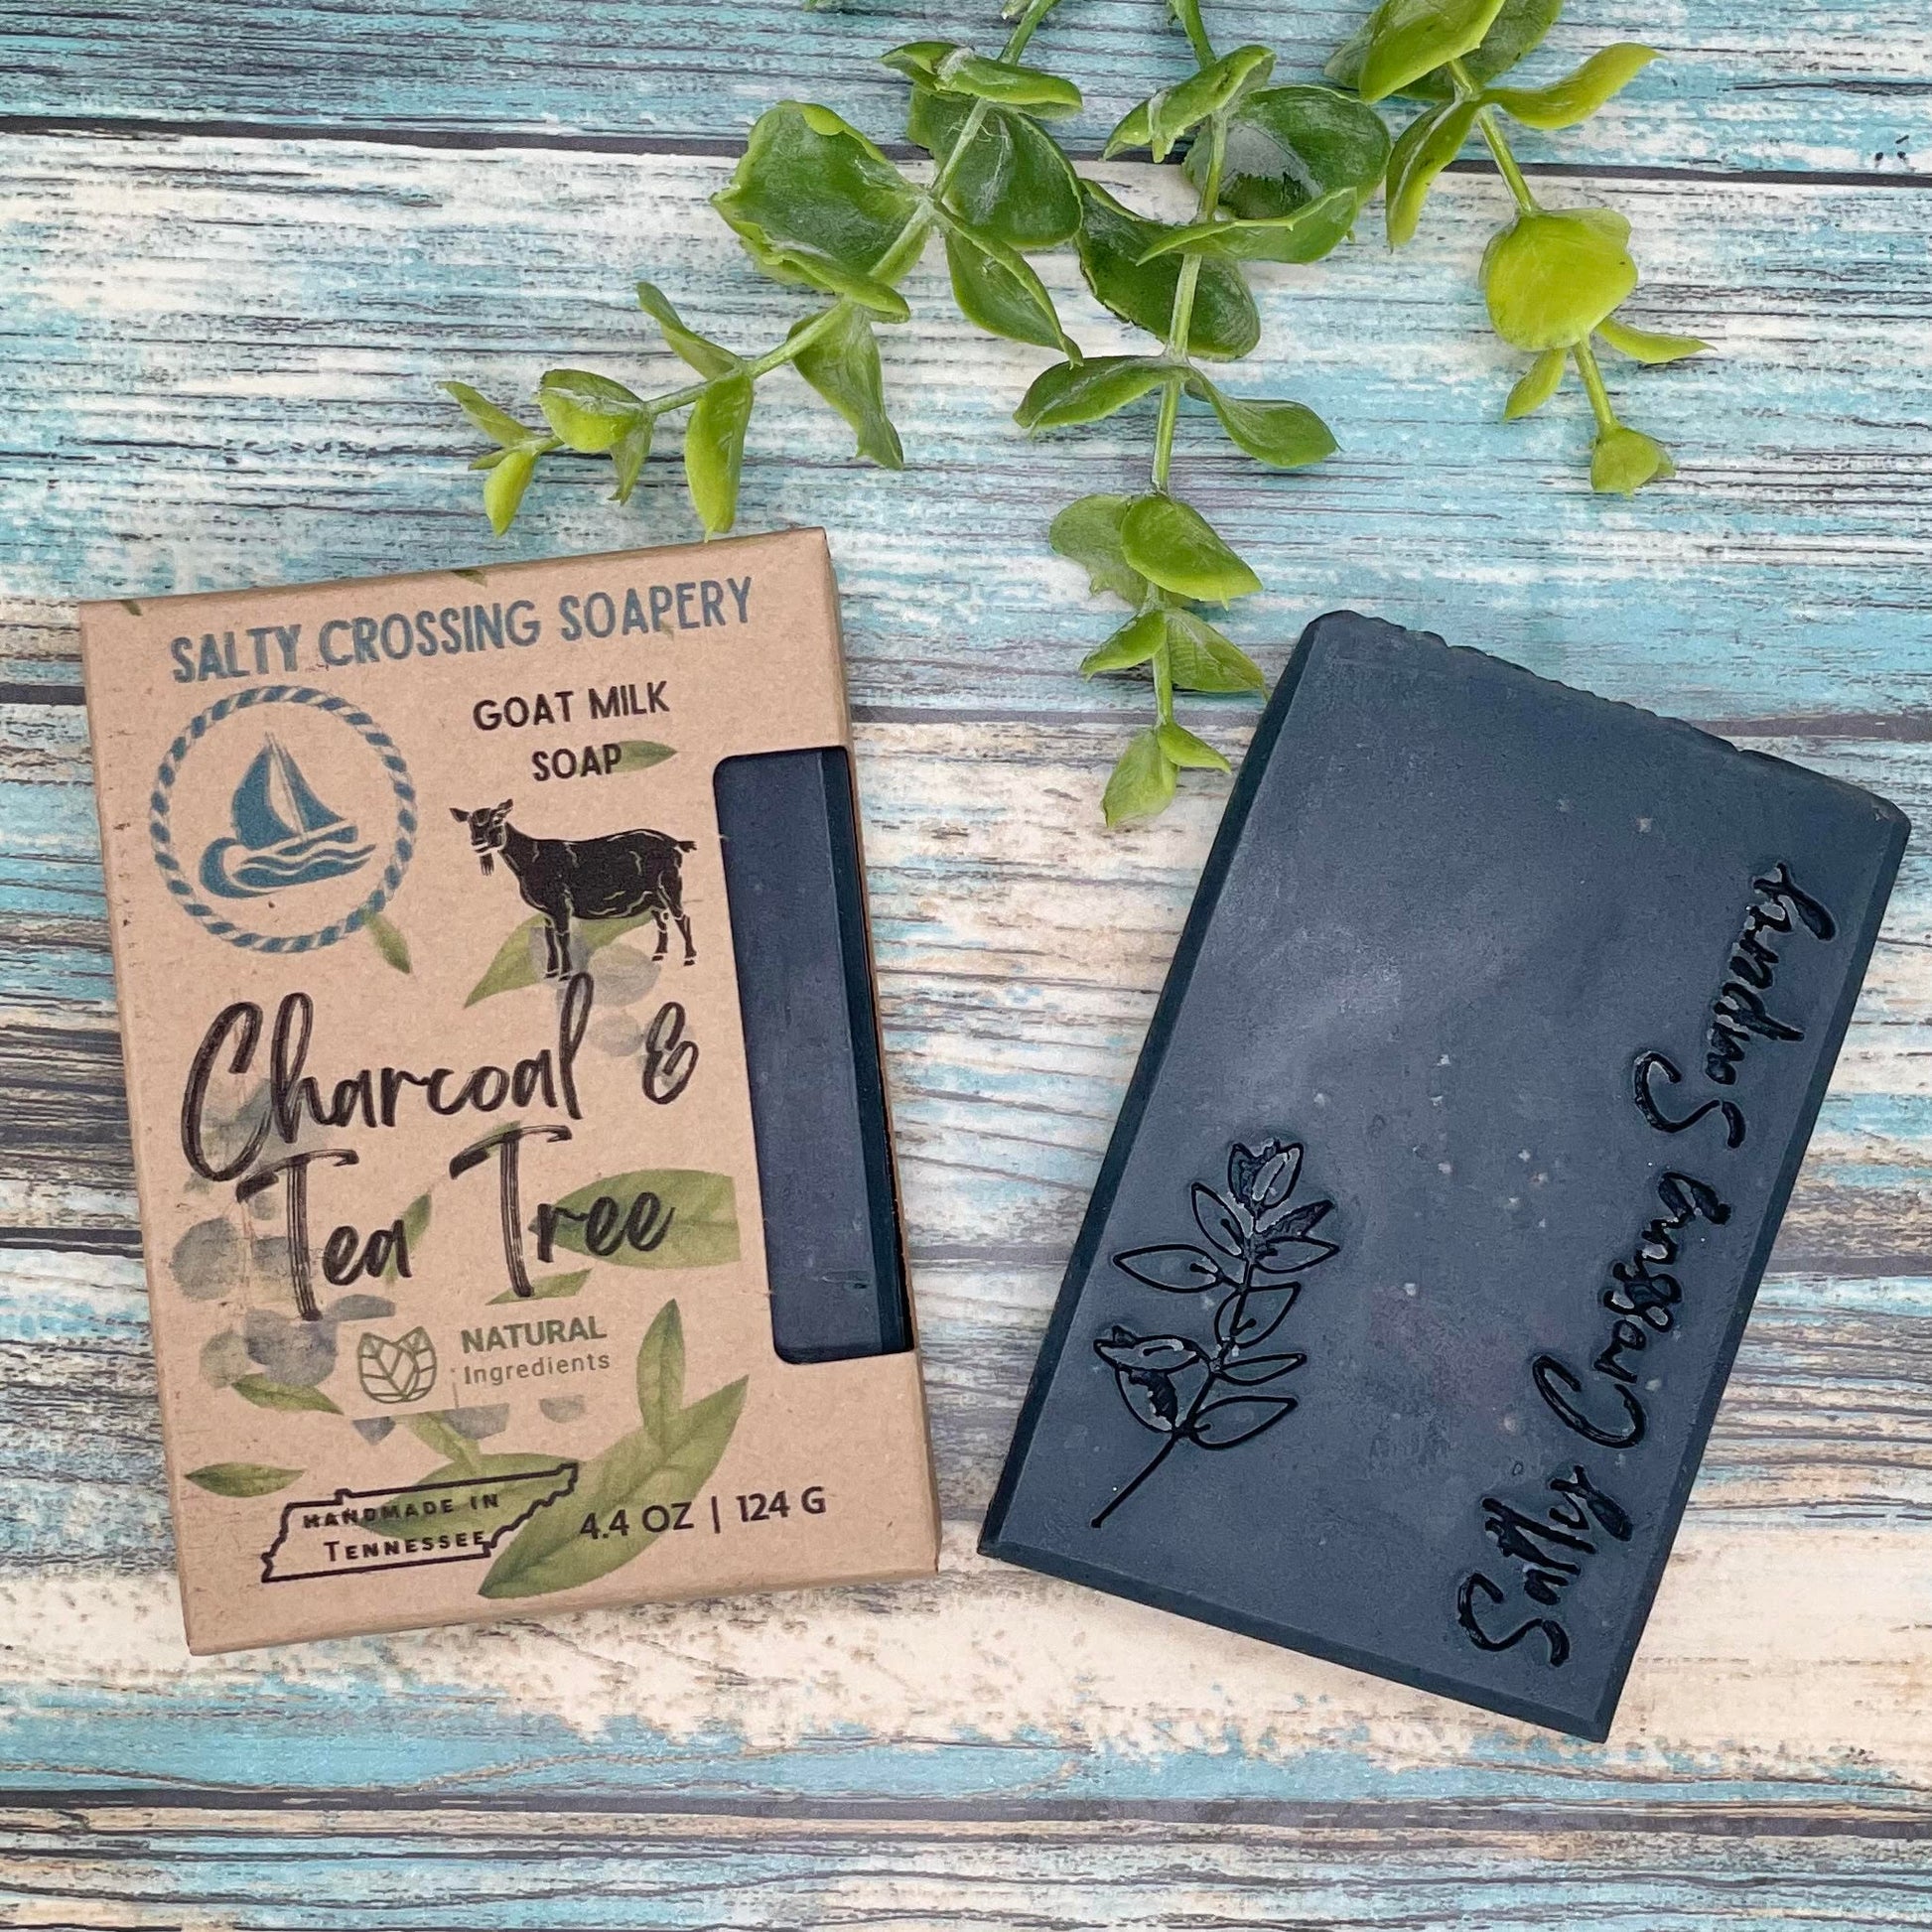 Charcoal and tea tree goat milk soap with box solid black soap bar with a stamp of plant line art and text salty crossing Soapery